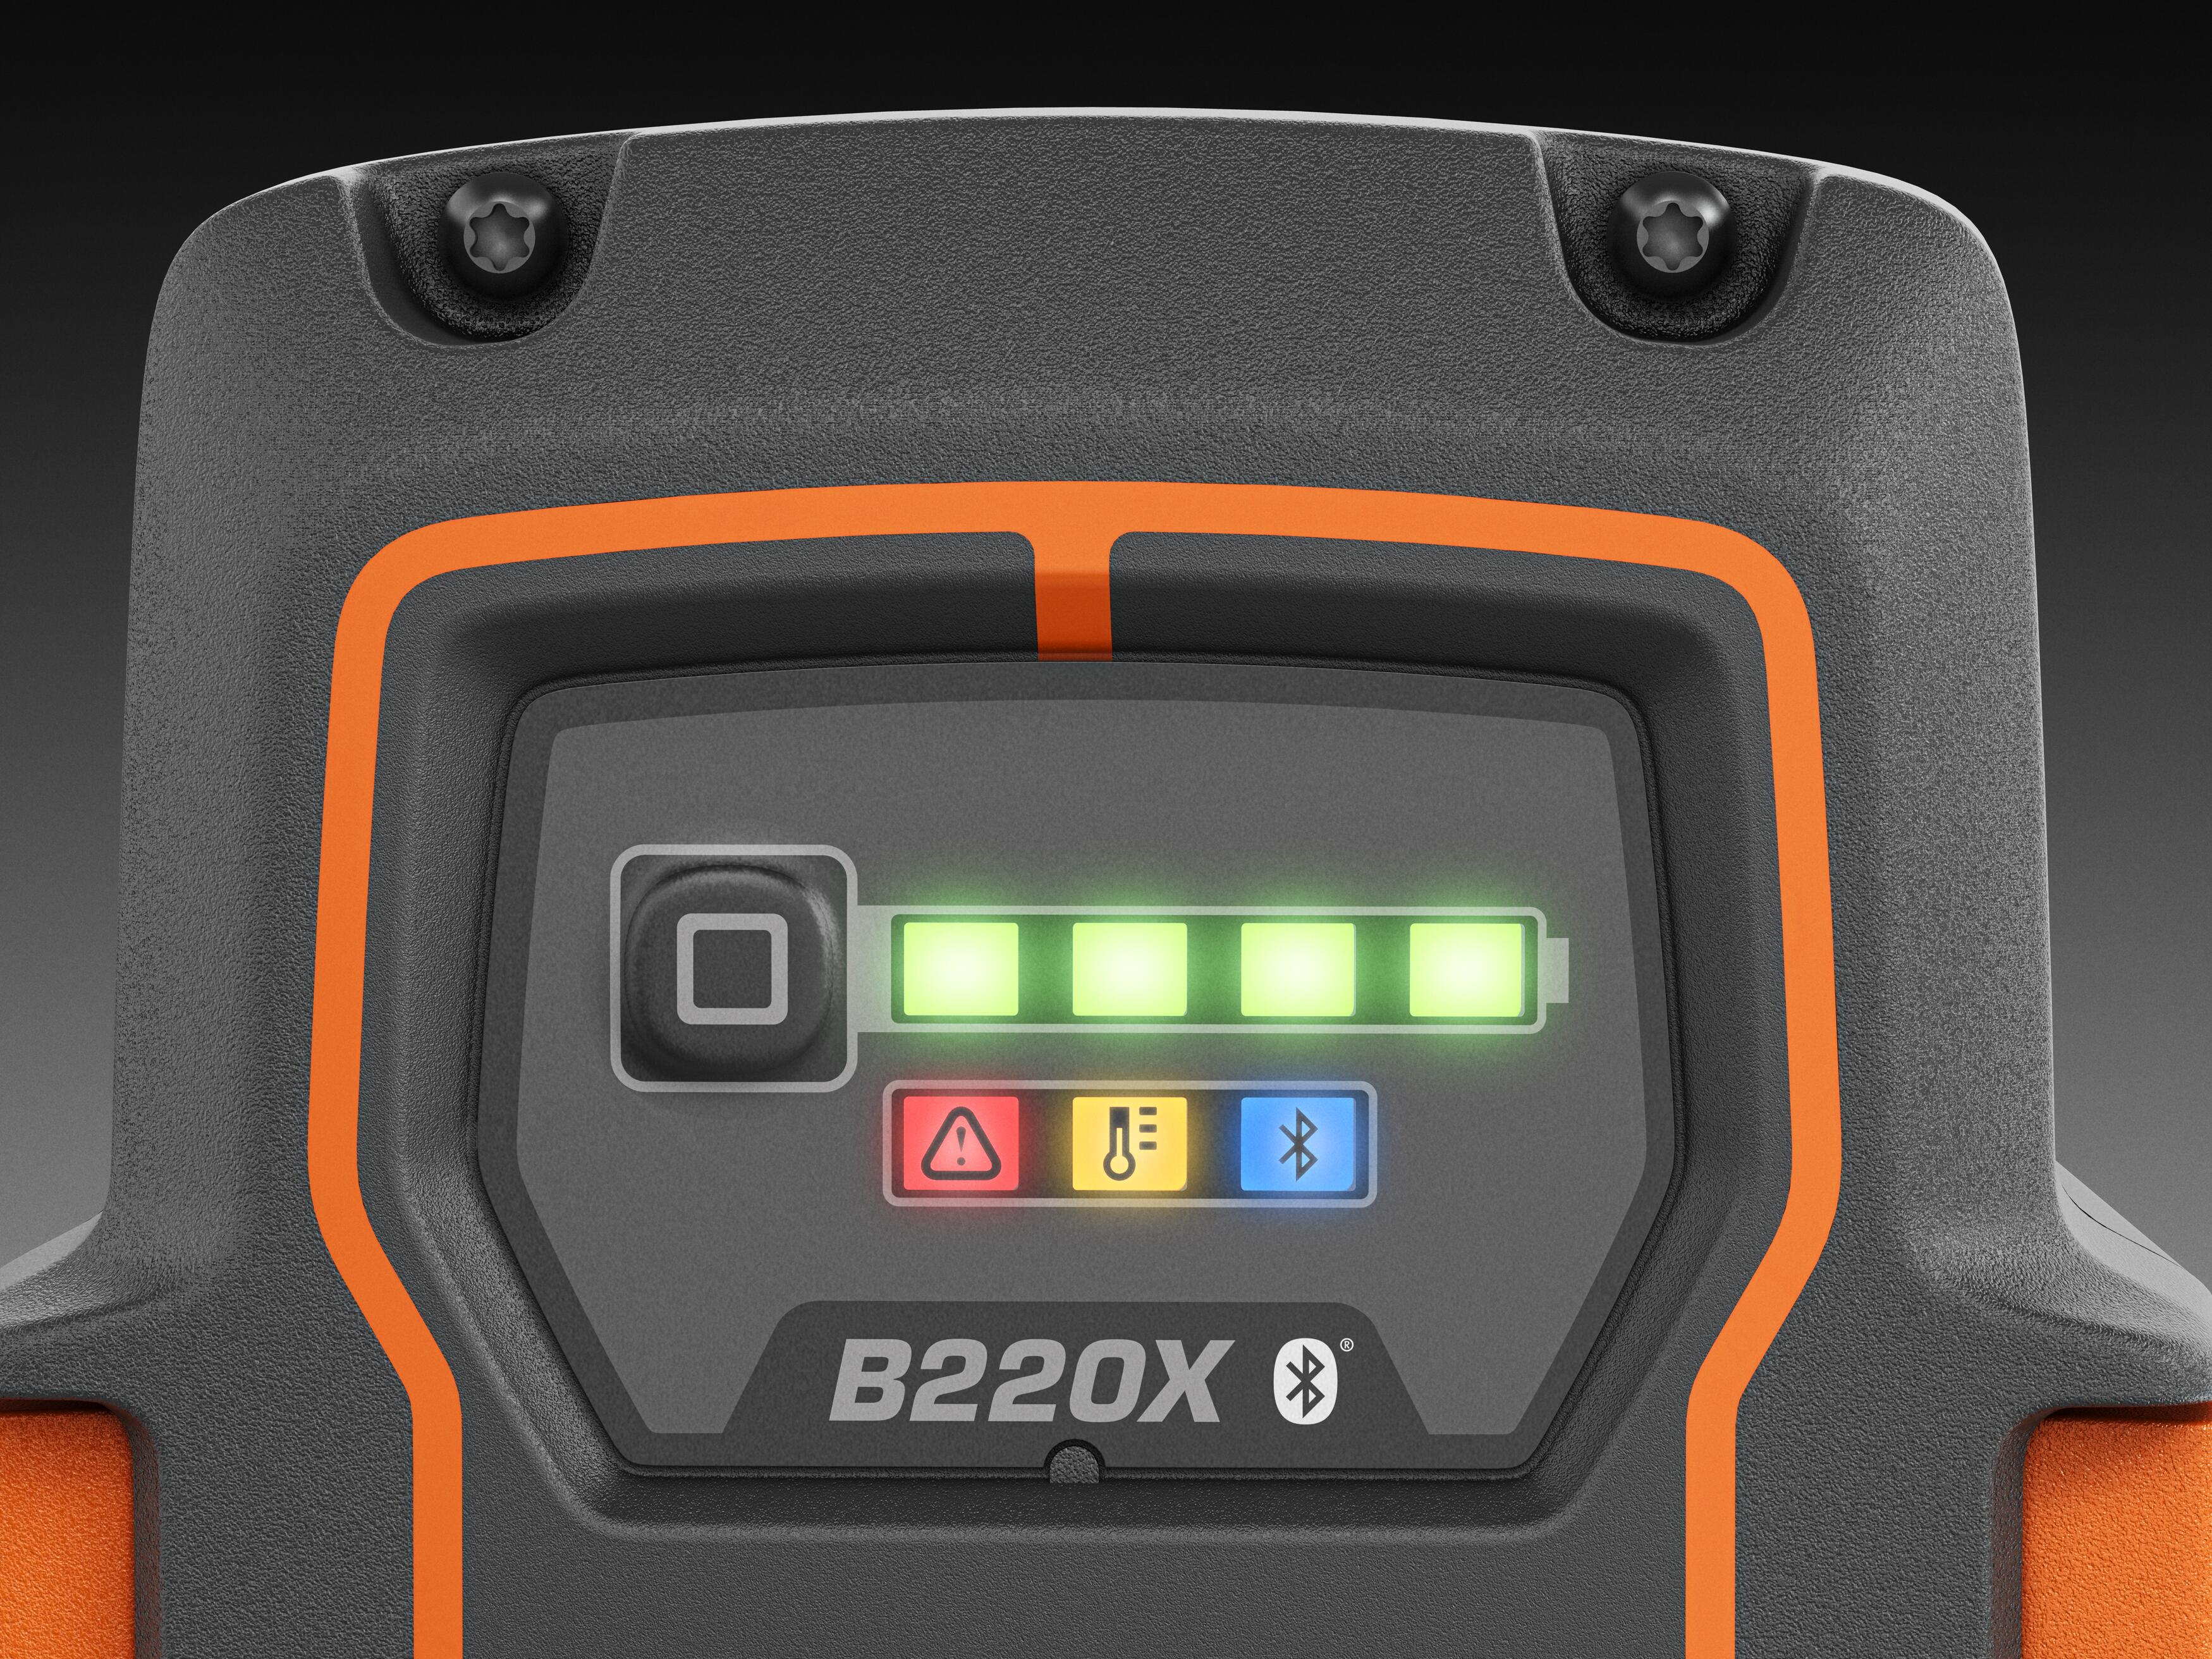 PRO batteries, Intuitive user interface